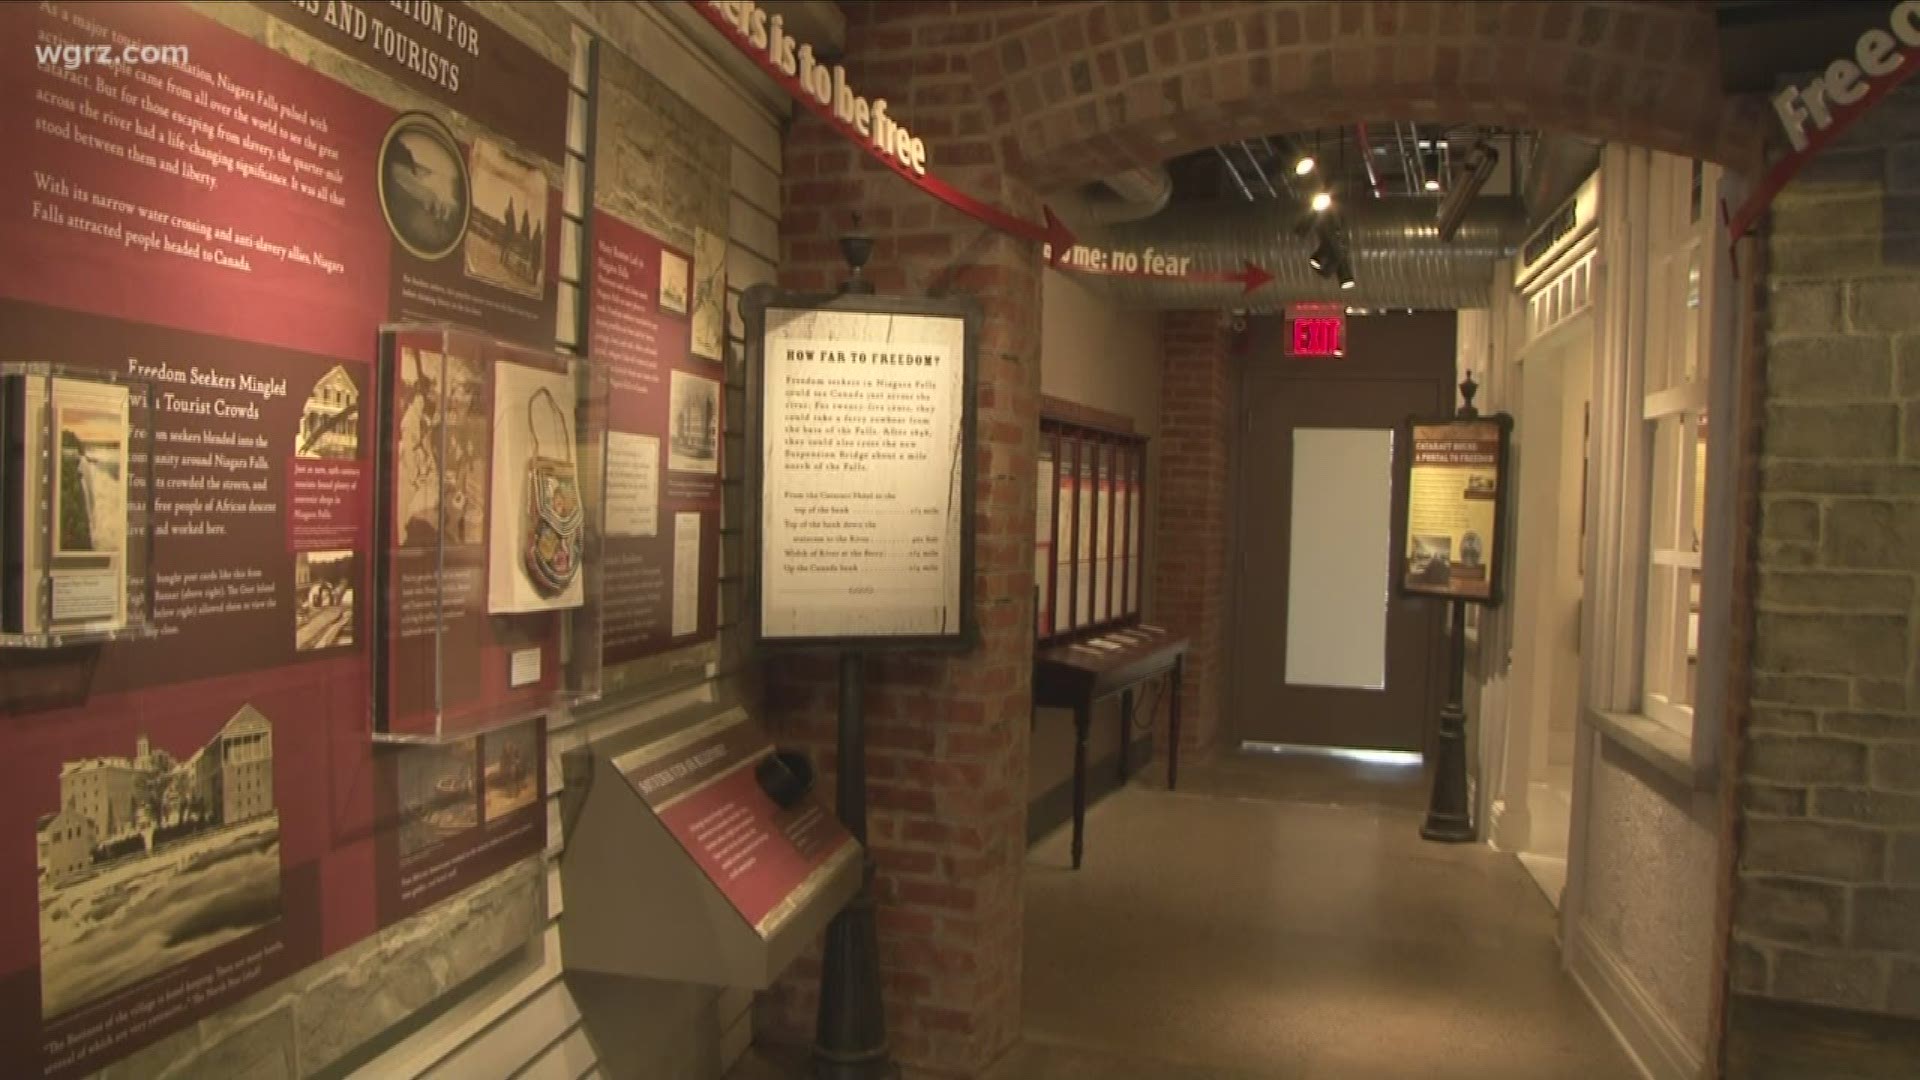 It was awarded the "Award of Excellence" for its permanent exhibit titled "One More River to Cross."
It was given by the "American Association for State and local history."